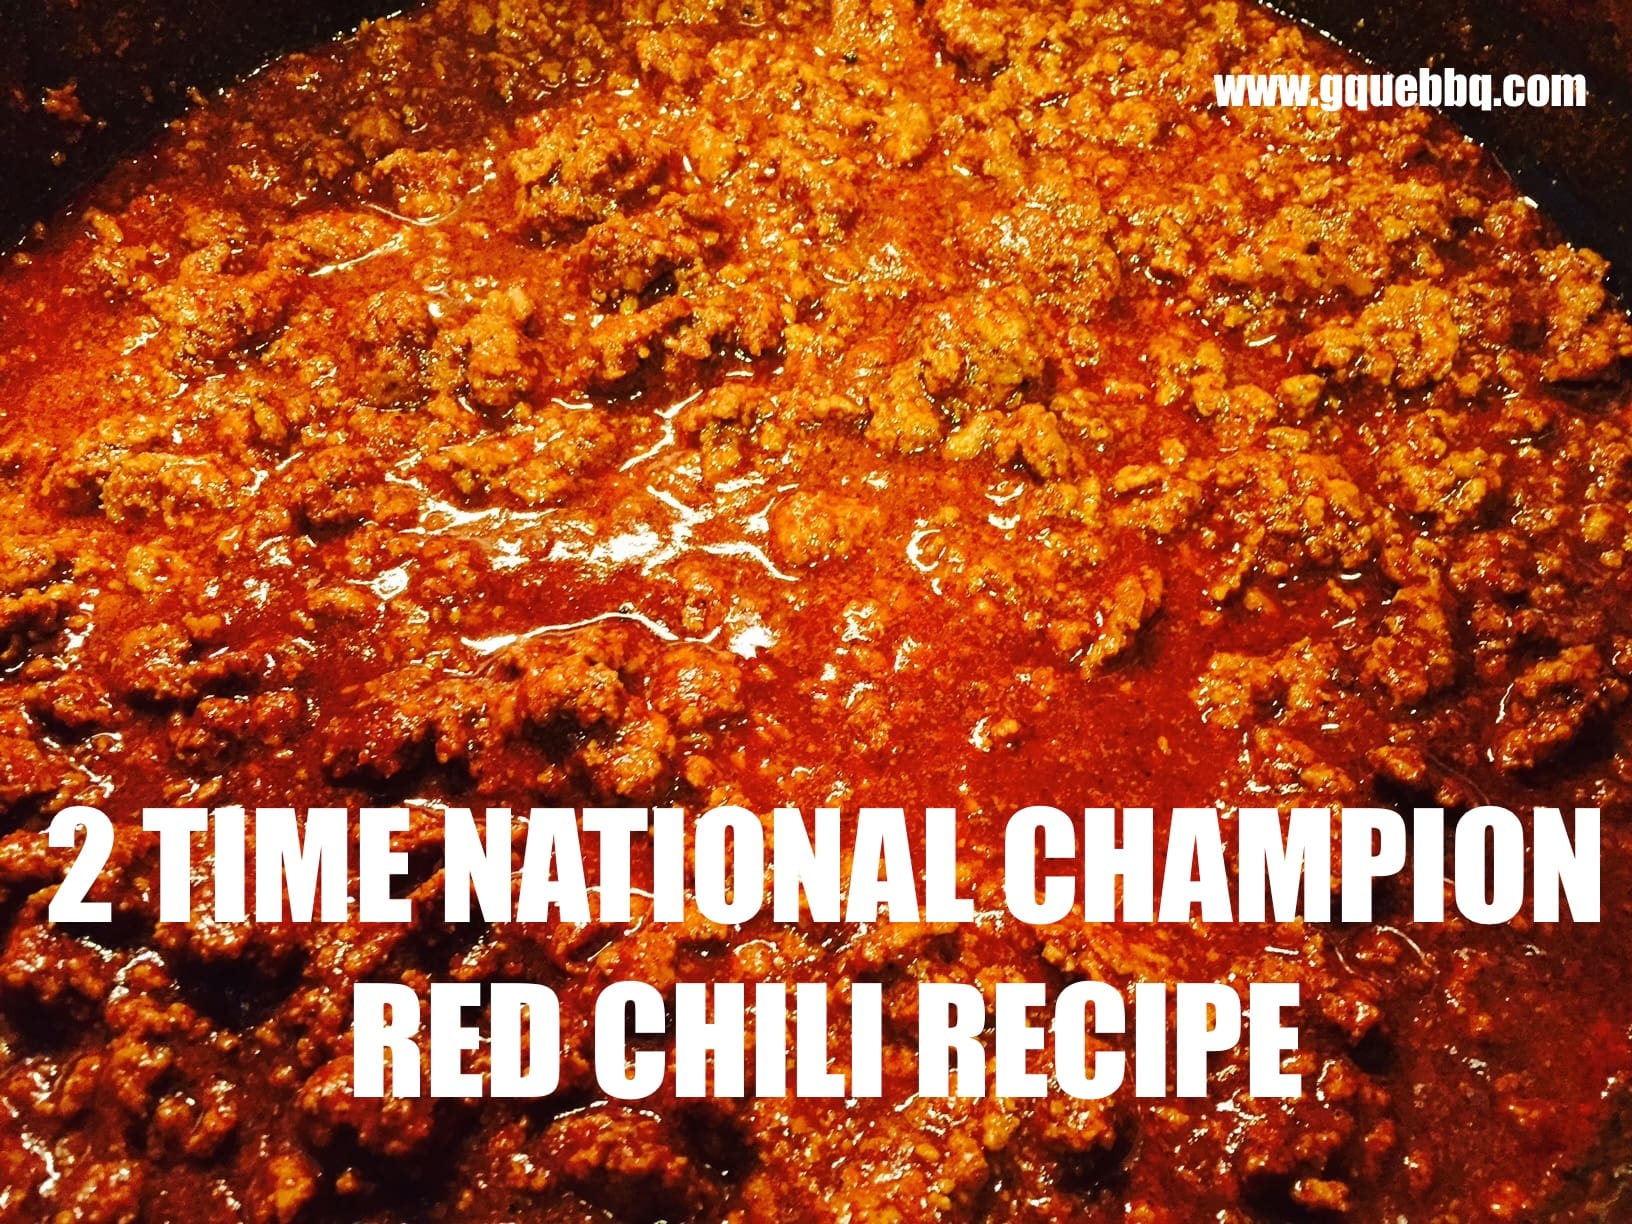 2 Time National Champion Margaret Nadeaus Red Chili Recipe ...